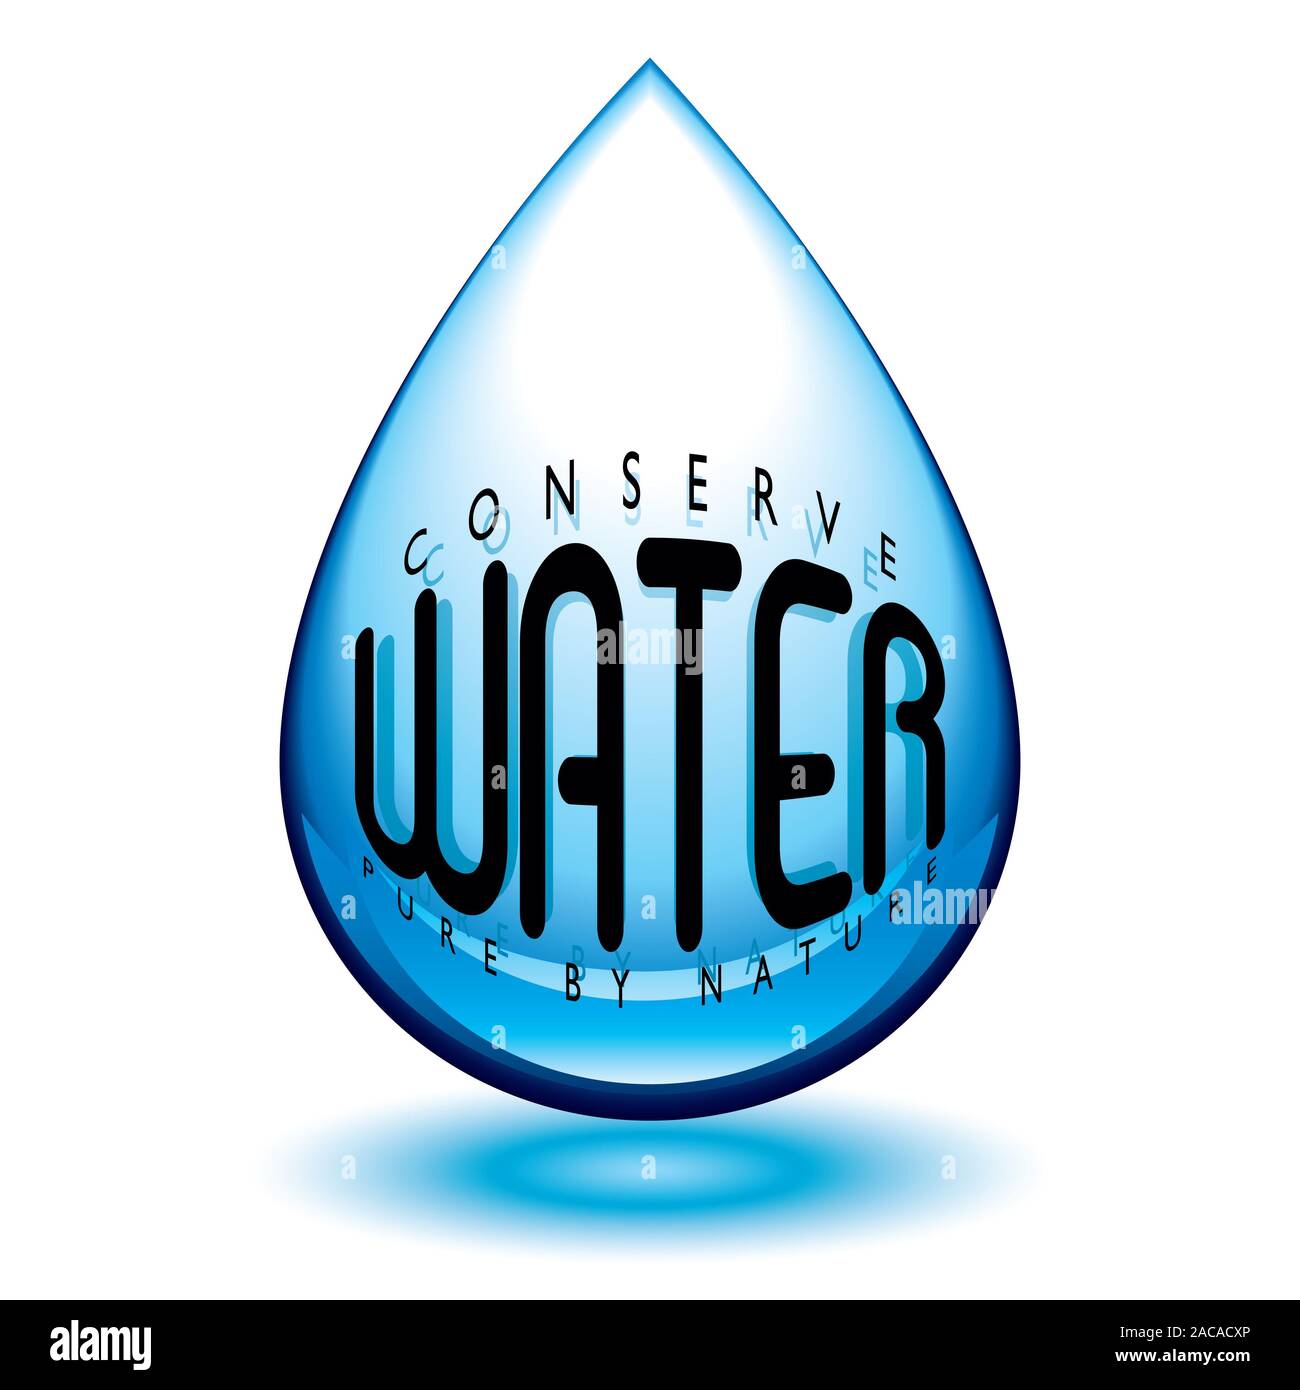 conserve water Stock Photo